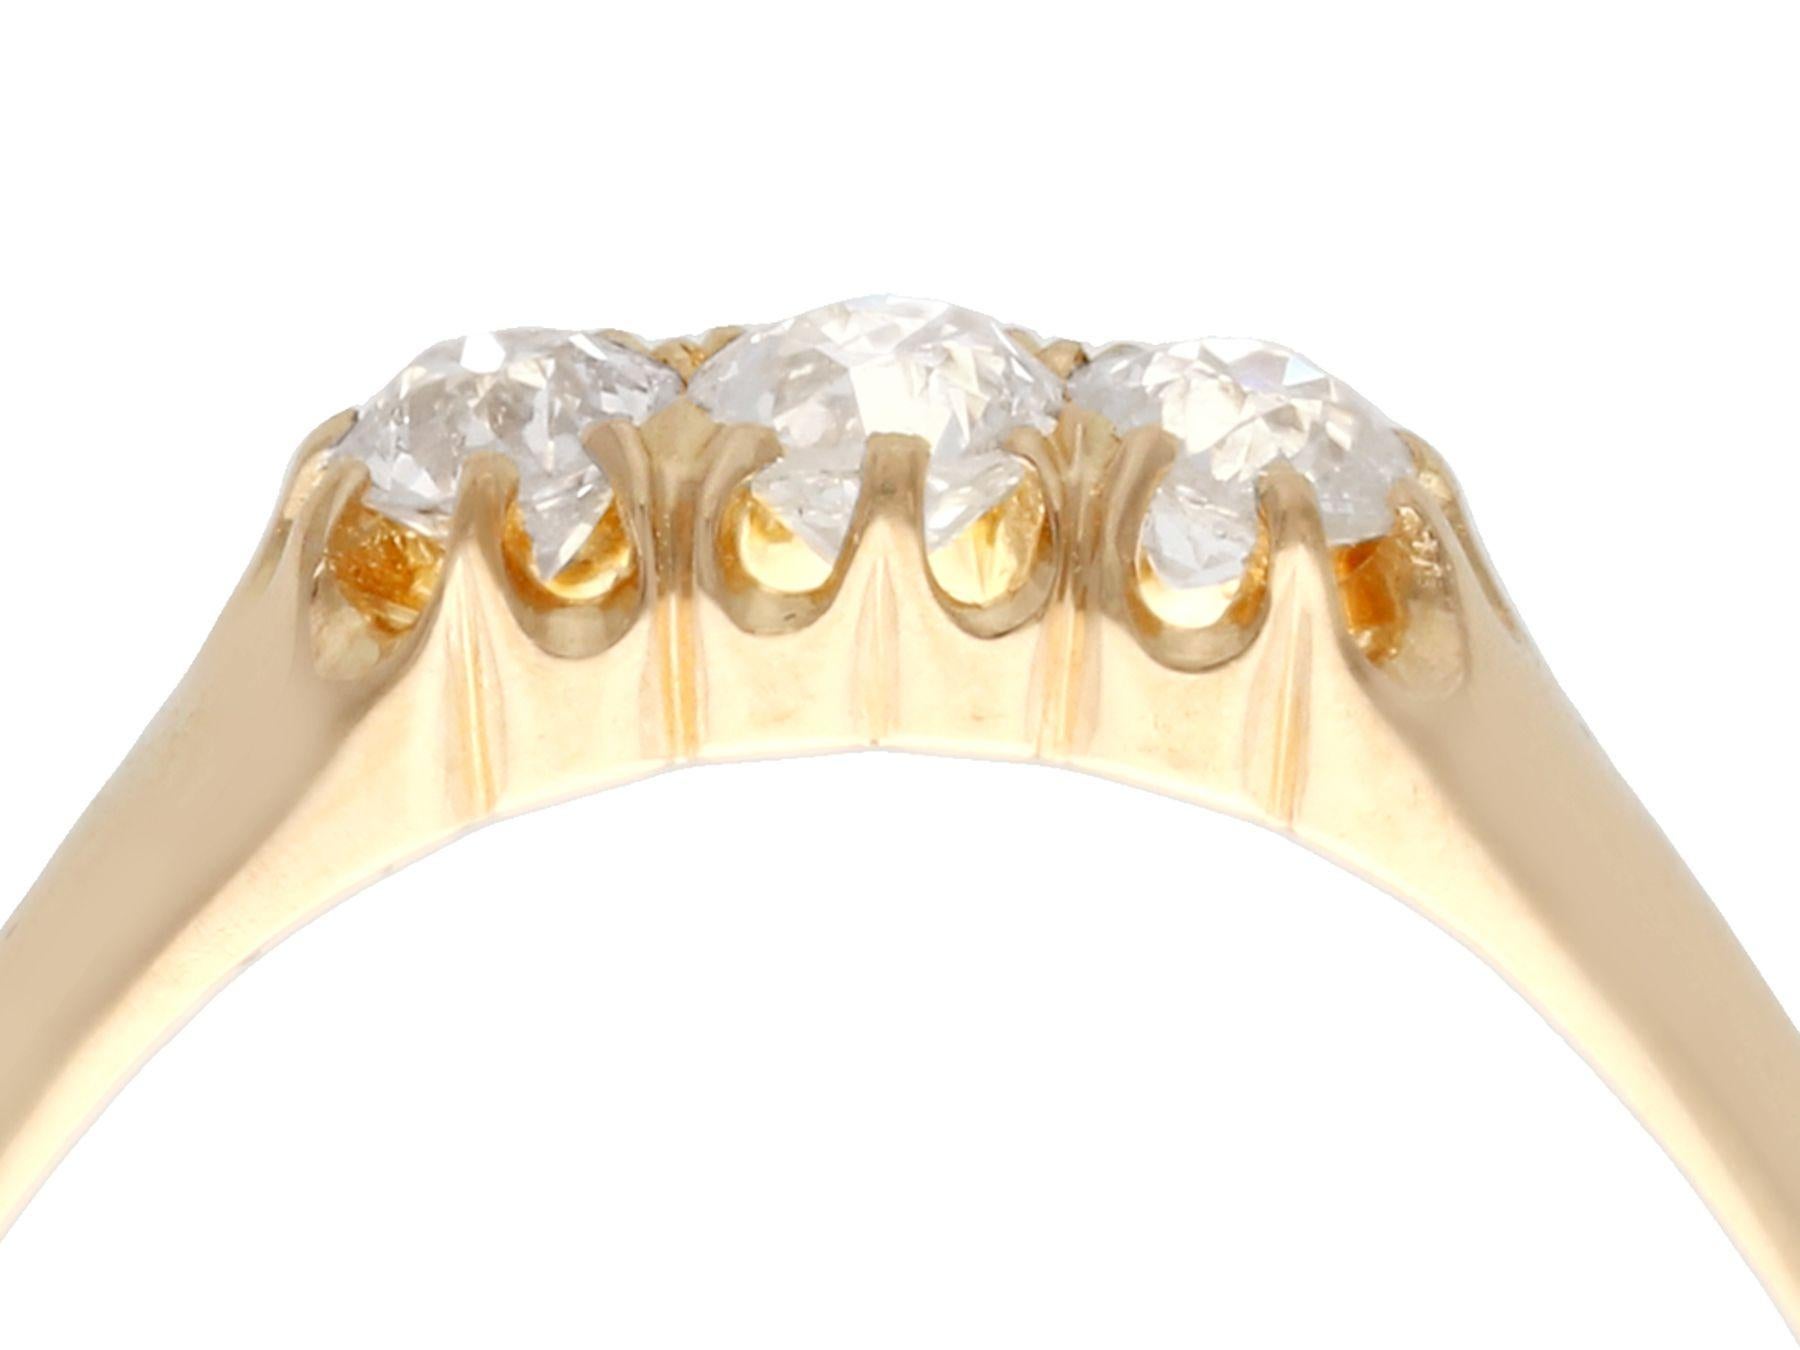 A fine and impressive antique Swedish 0.55 carat diamond, 18 karat yellow gold trilogy ring; part of our antique jewelry and estate jewelry collections.

This impressive Swedish antique trilogy ring has been crafted in 18k yellow gold.

The subtly